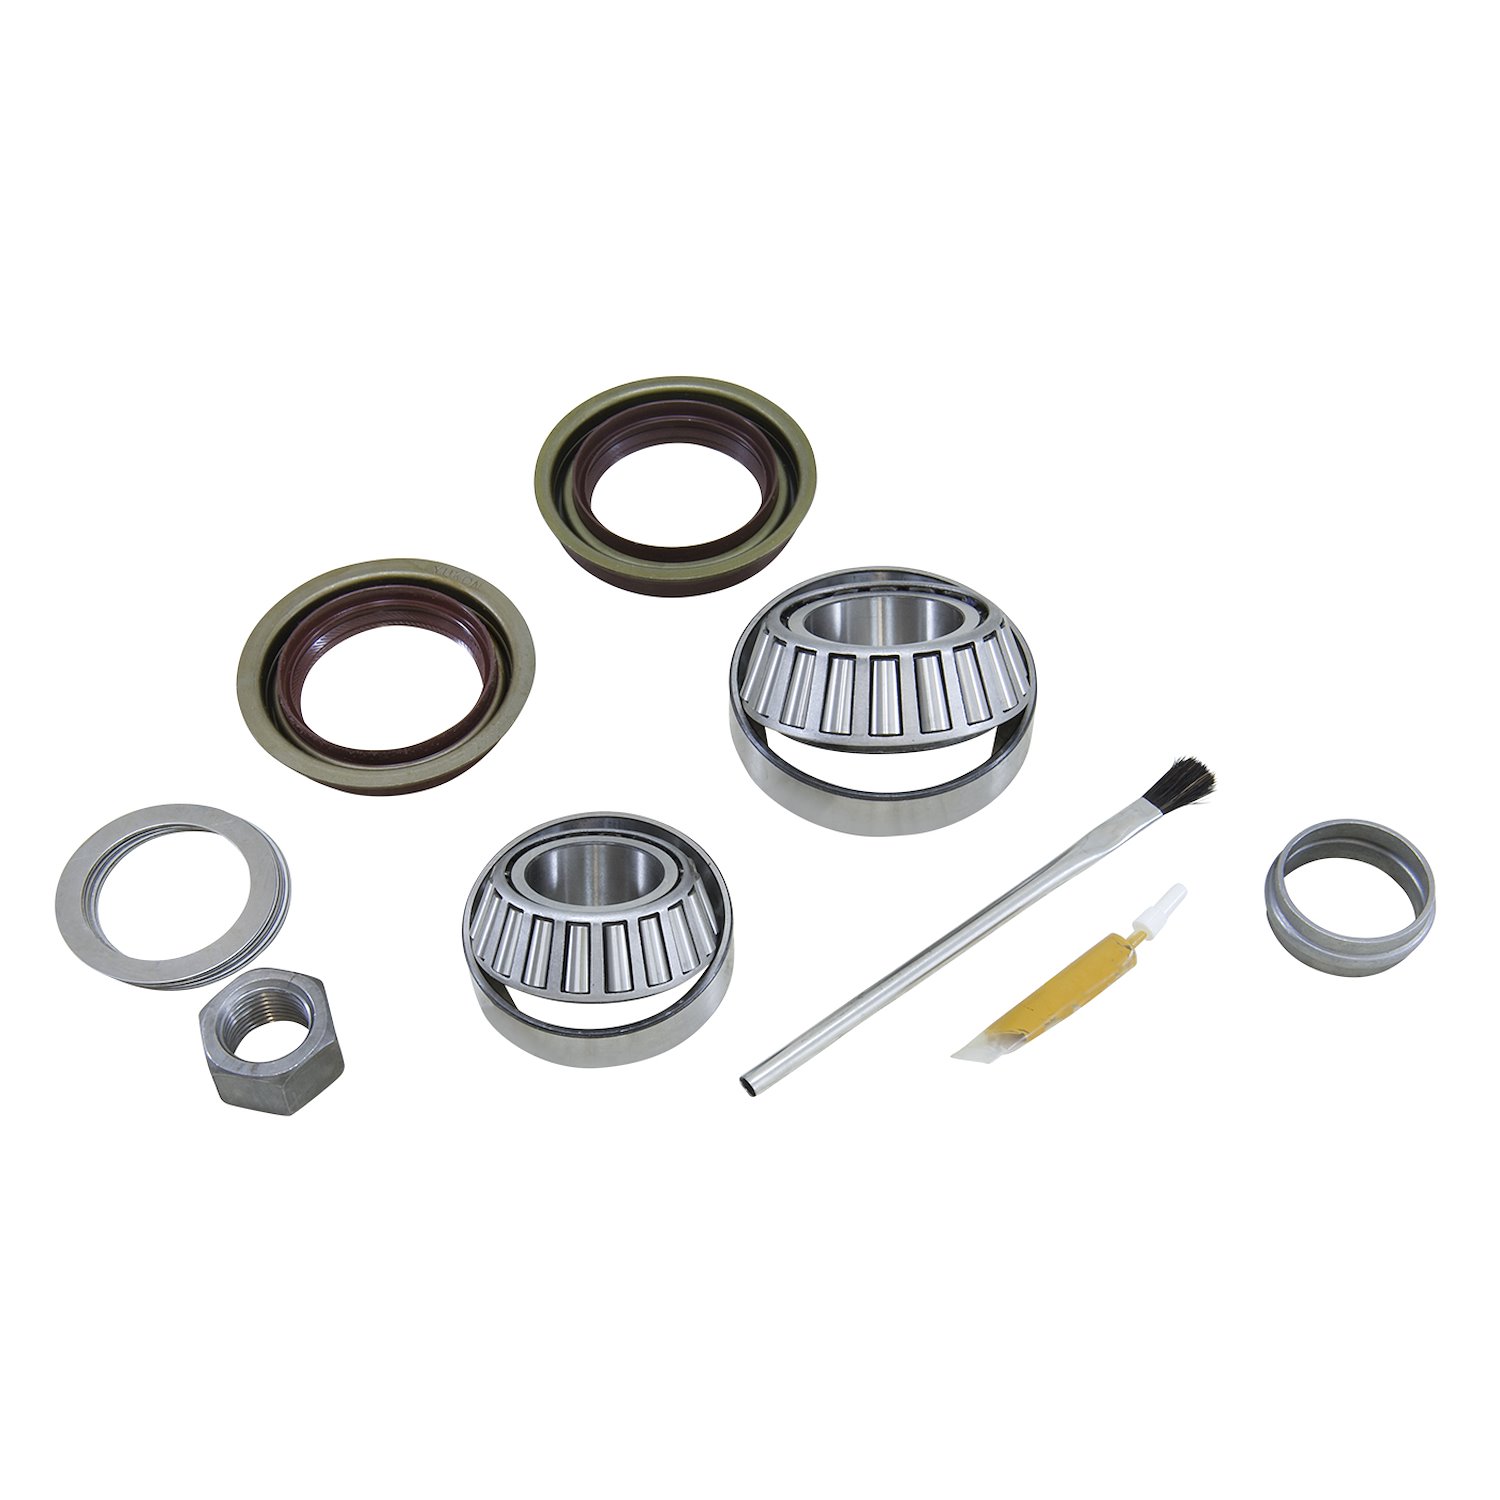 USA Standard ZPKF9.75 Pinion Installation Kit, For 1997-2010 Ford 9.75 in.